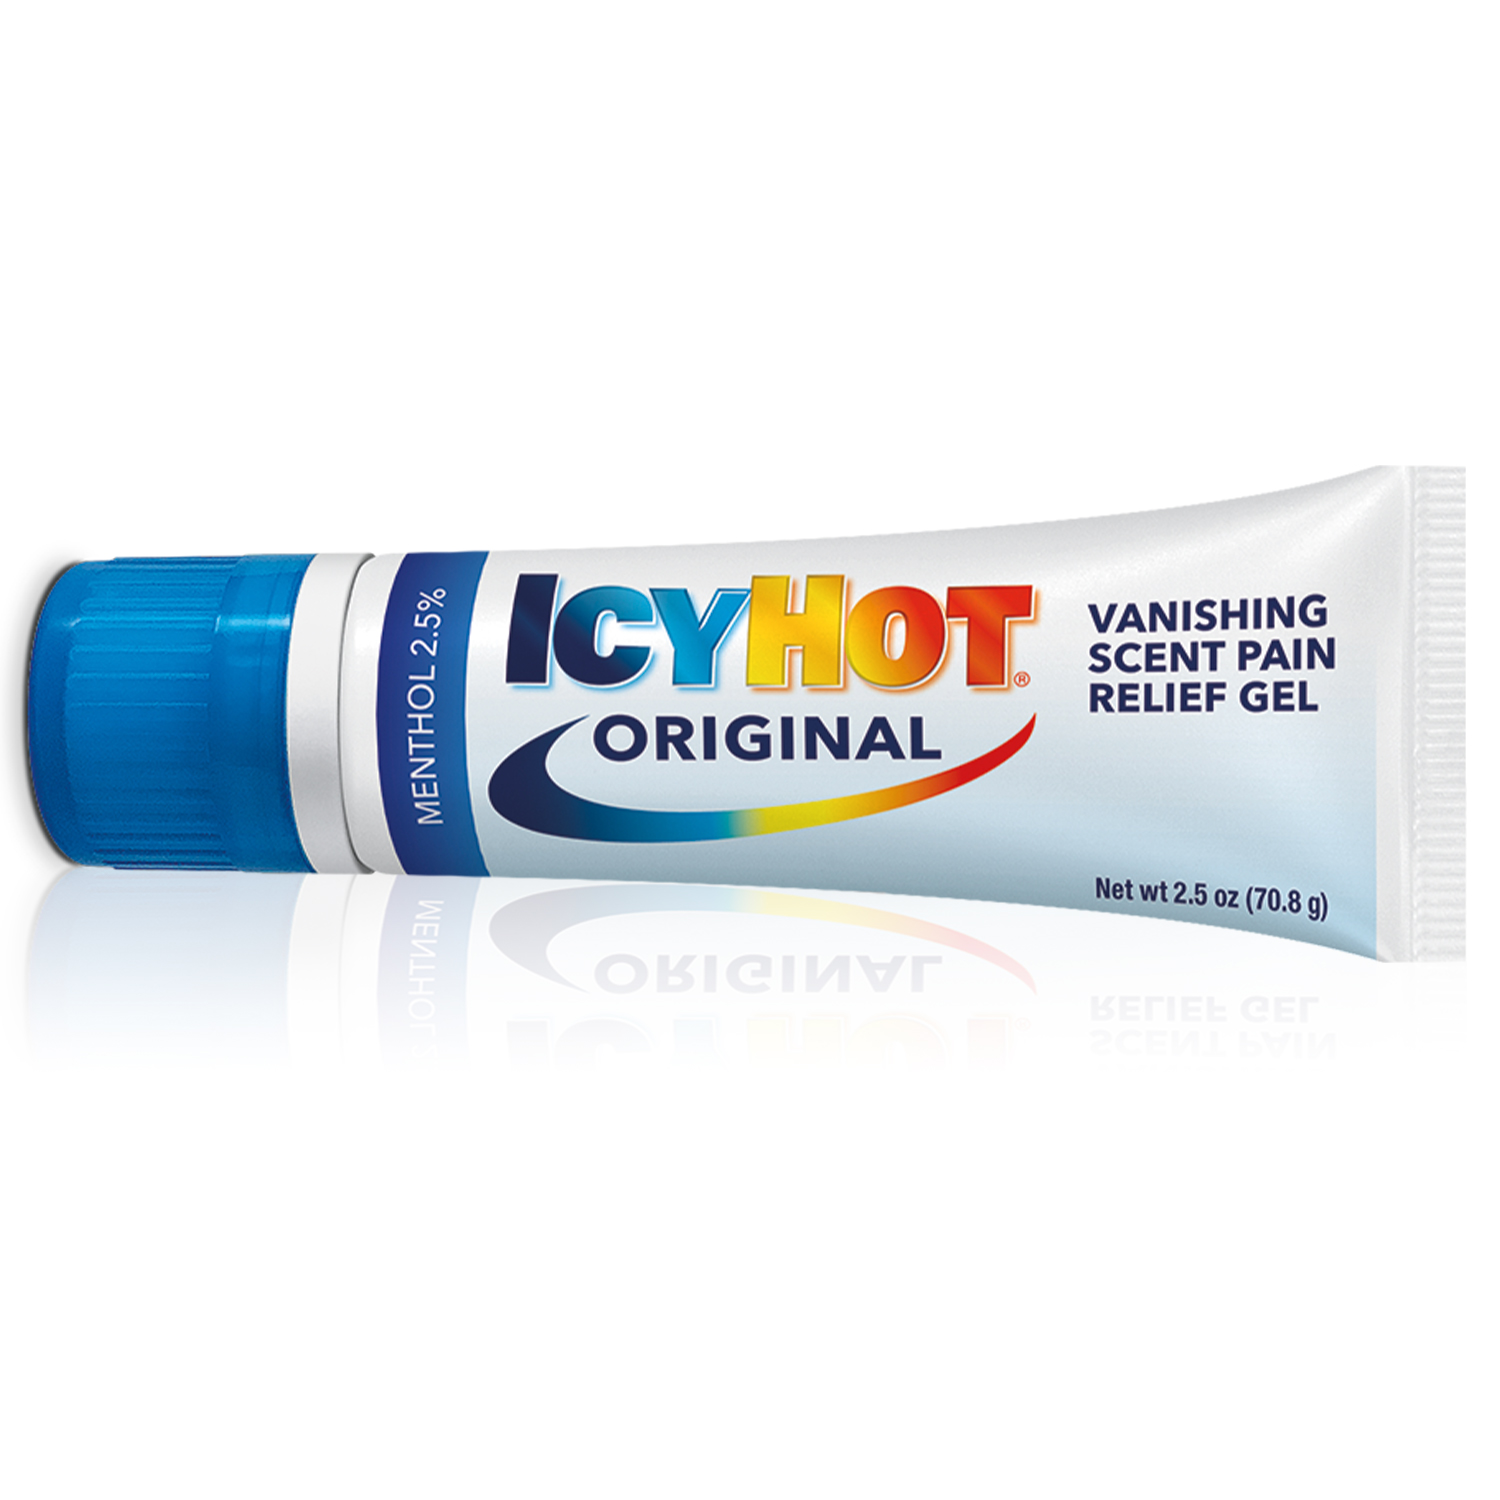 Icy Hot Vanishing Scent Pain Relief Gel With Menthol, 2.5 Ounces - image 3 of 9